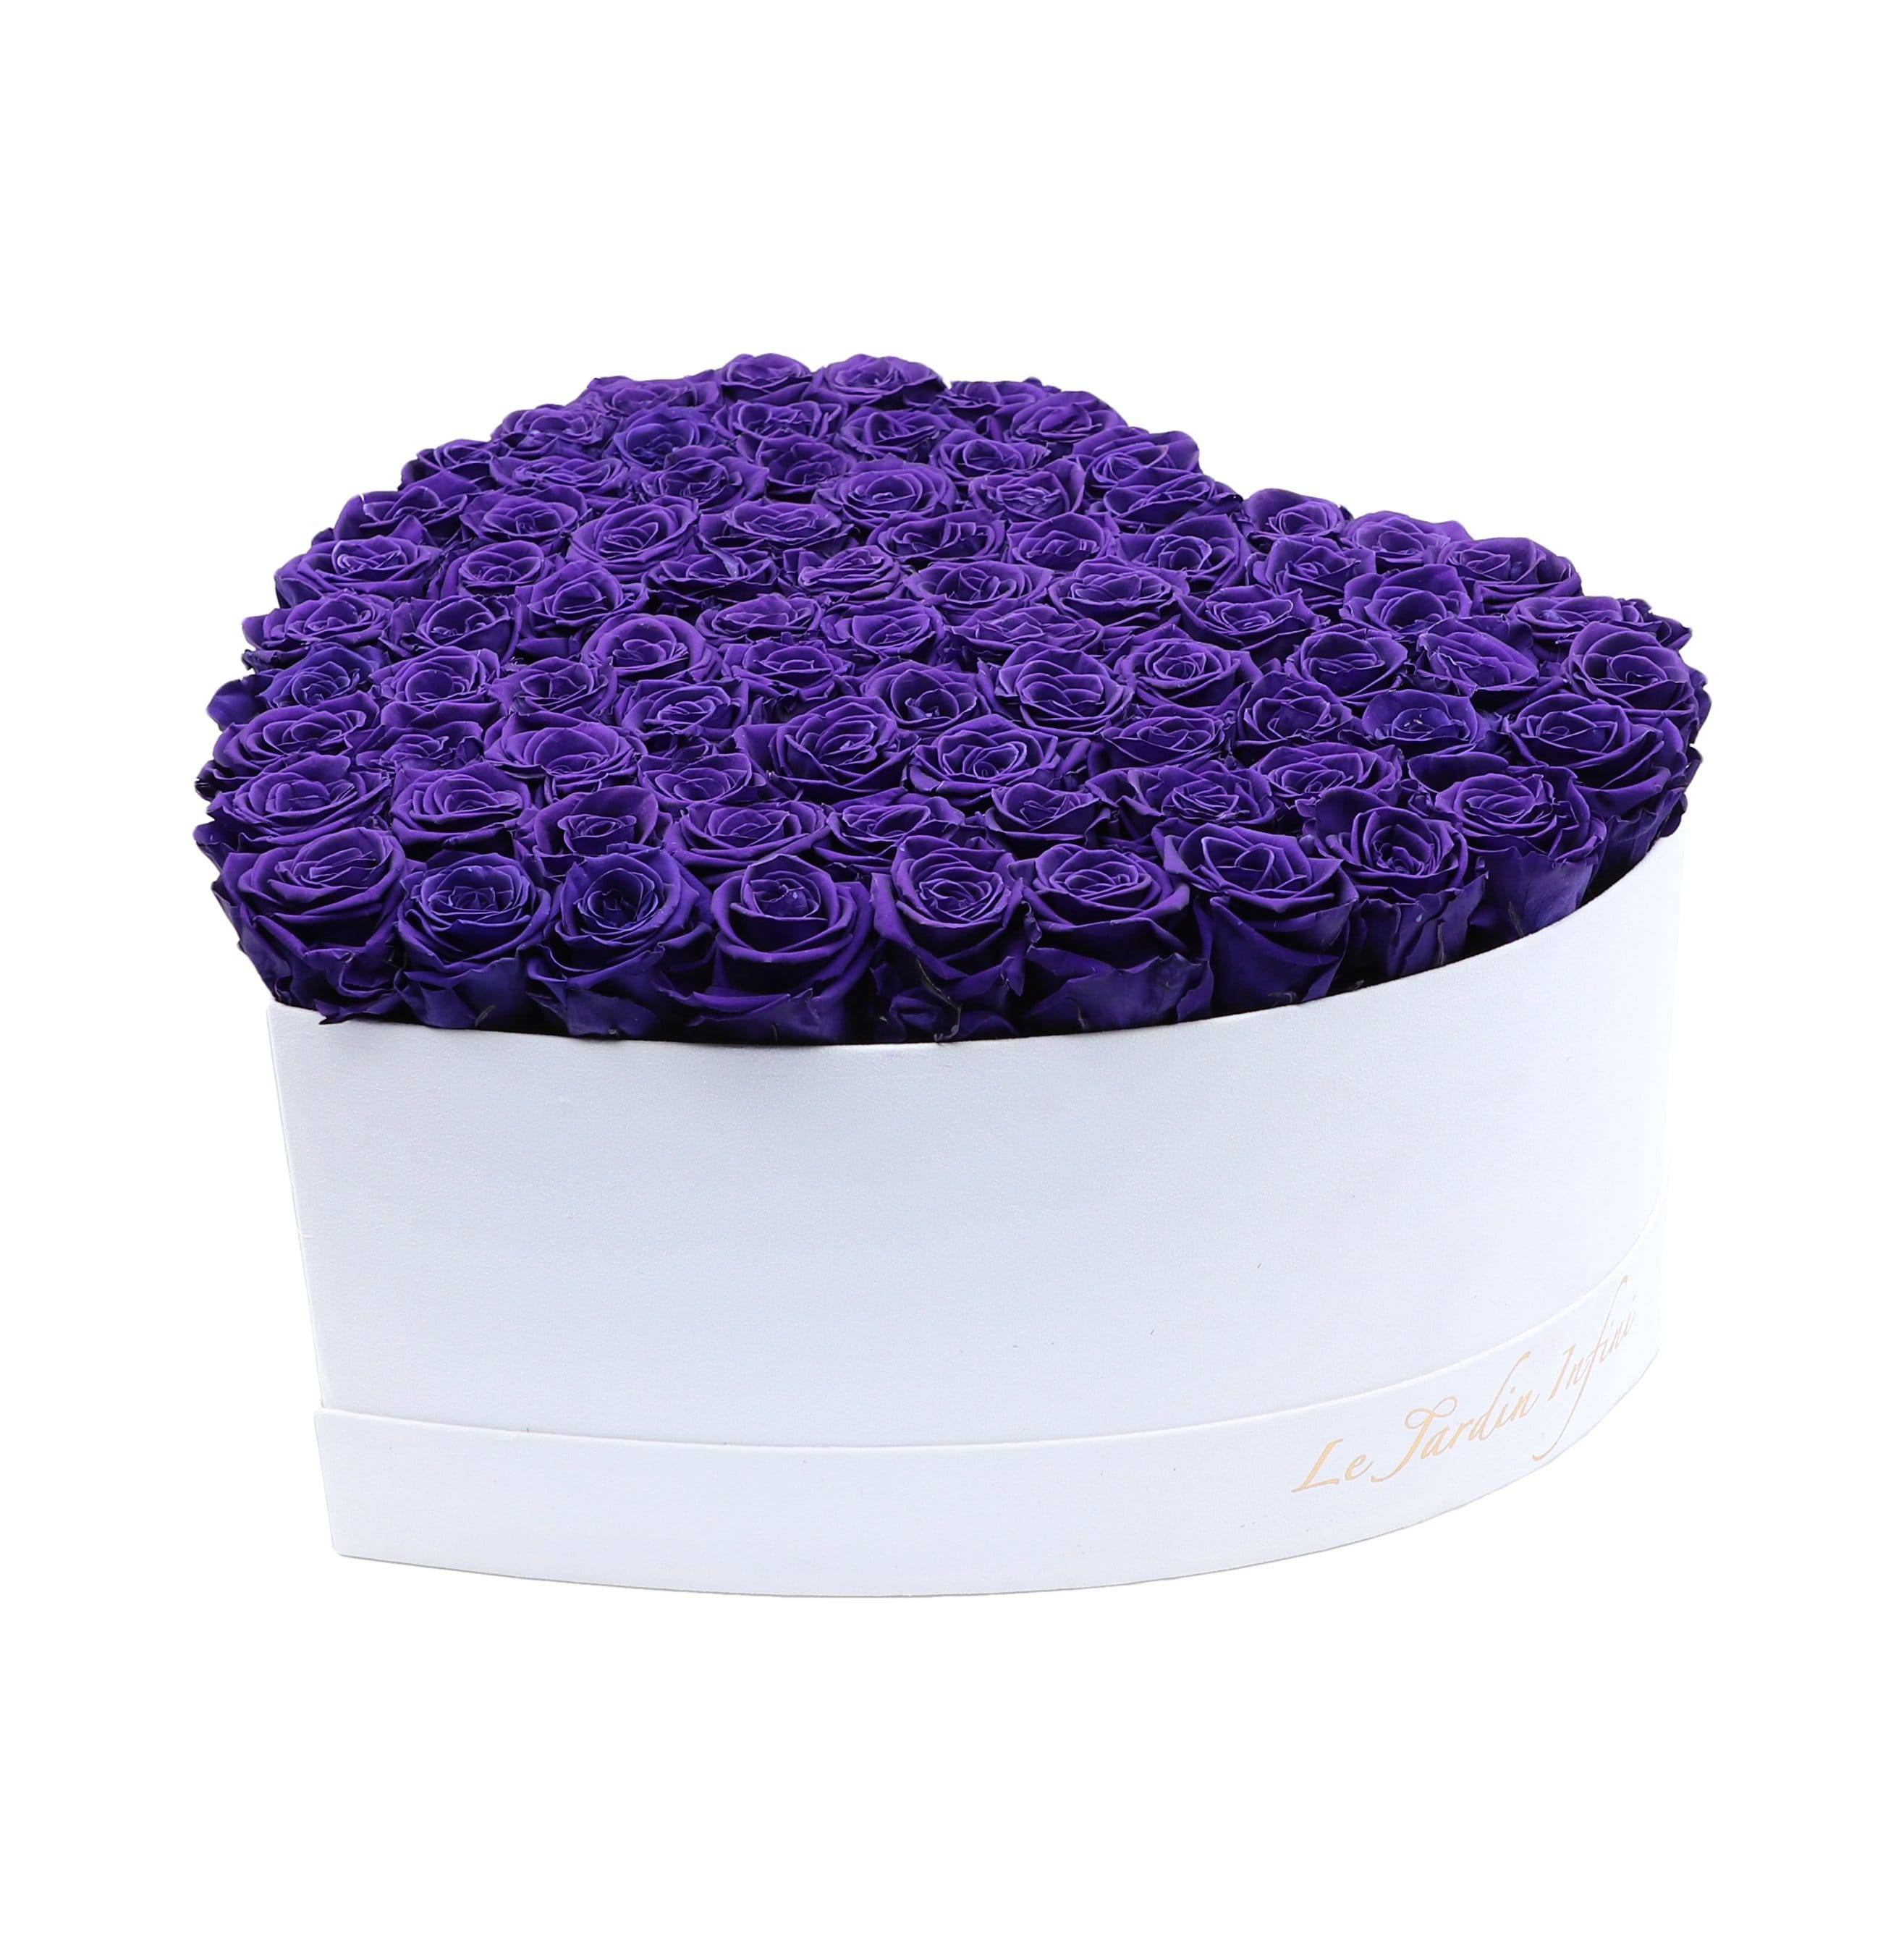 70-80 Purple Preserved Roses in A Heart Shaped Box- Large Heart Luxury White Suede Box (Custom) - Le Jardin Infini Roses in a Box